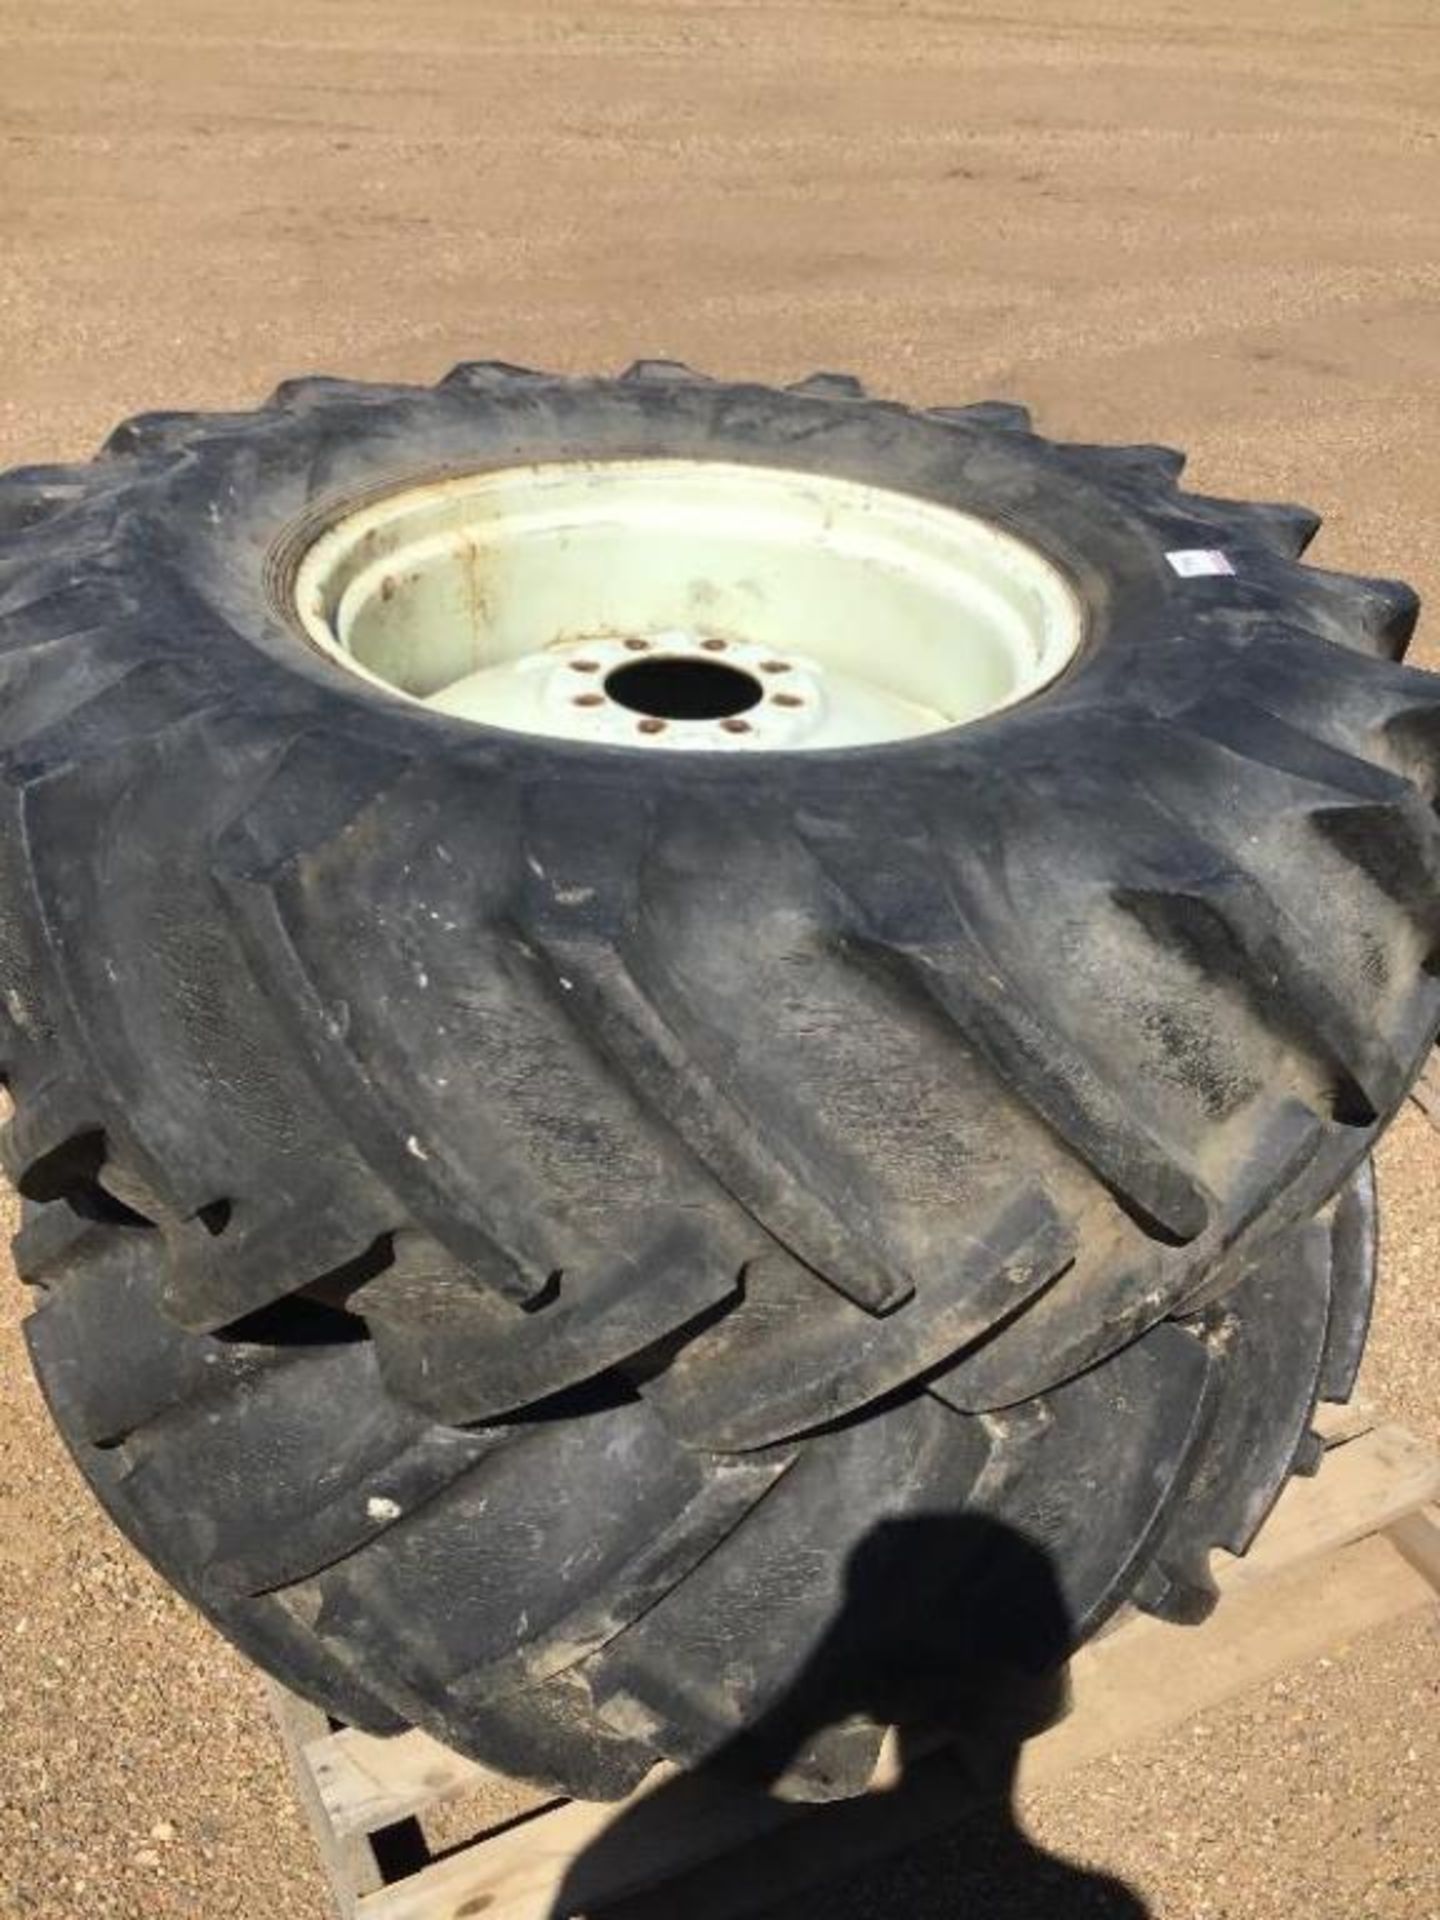 Set of (2) 18.4-26 Tires on 8-Bolt Rims Rims have been measured to fit rear hubs on a Case IH